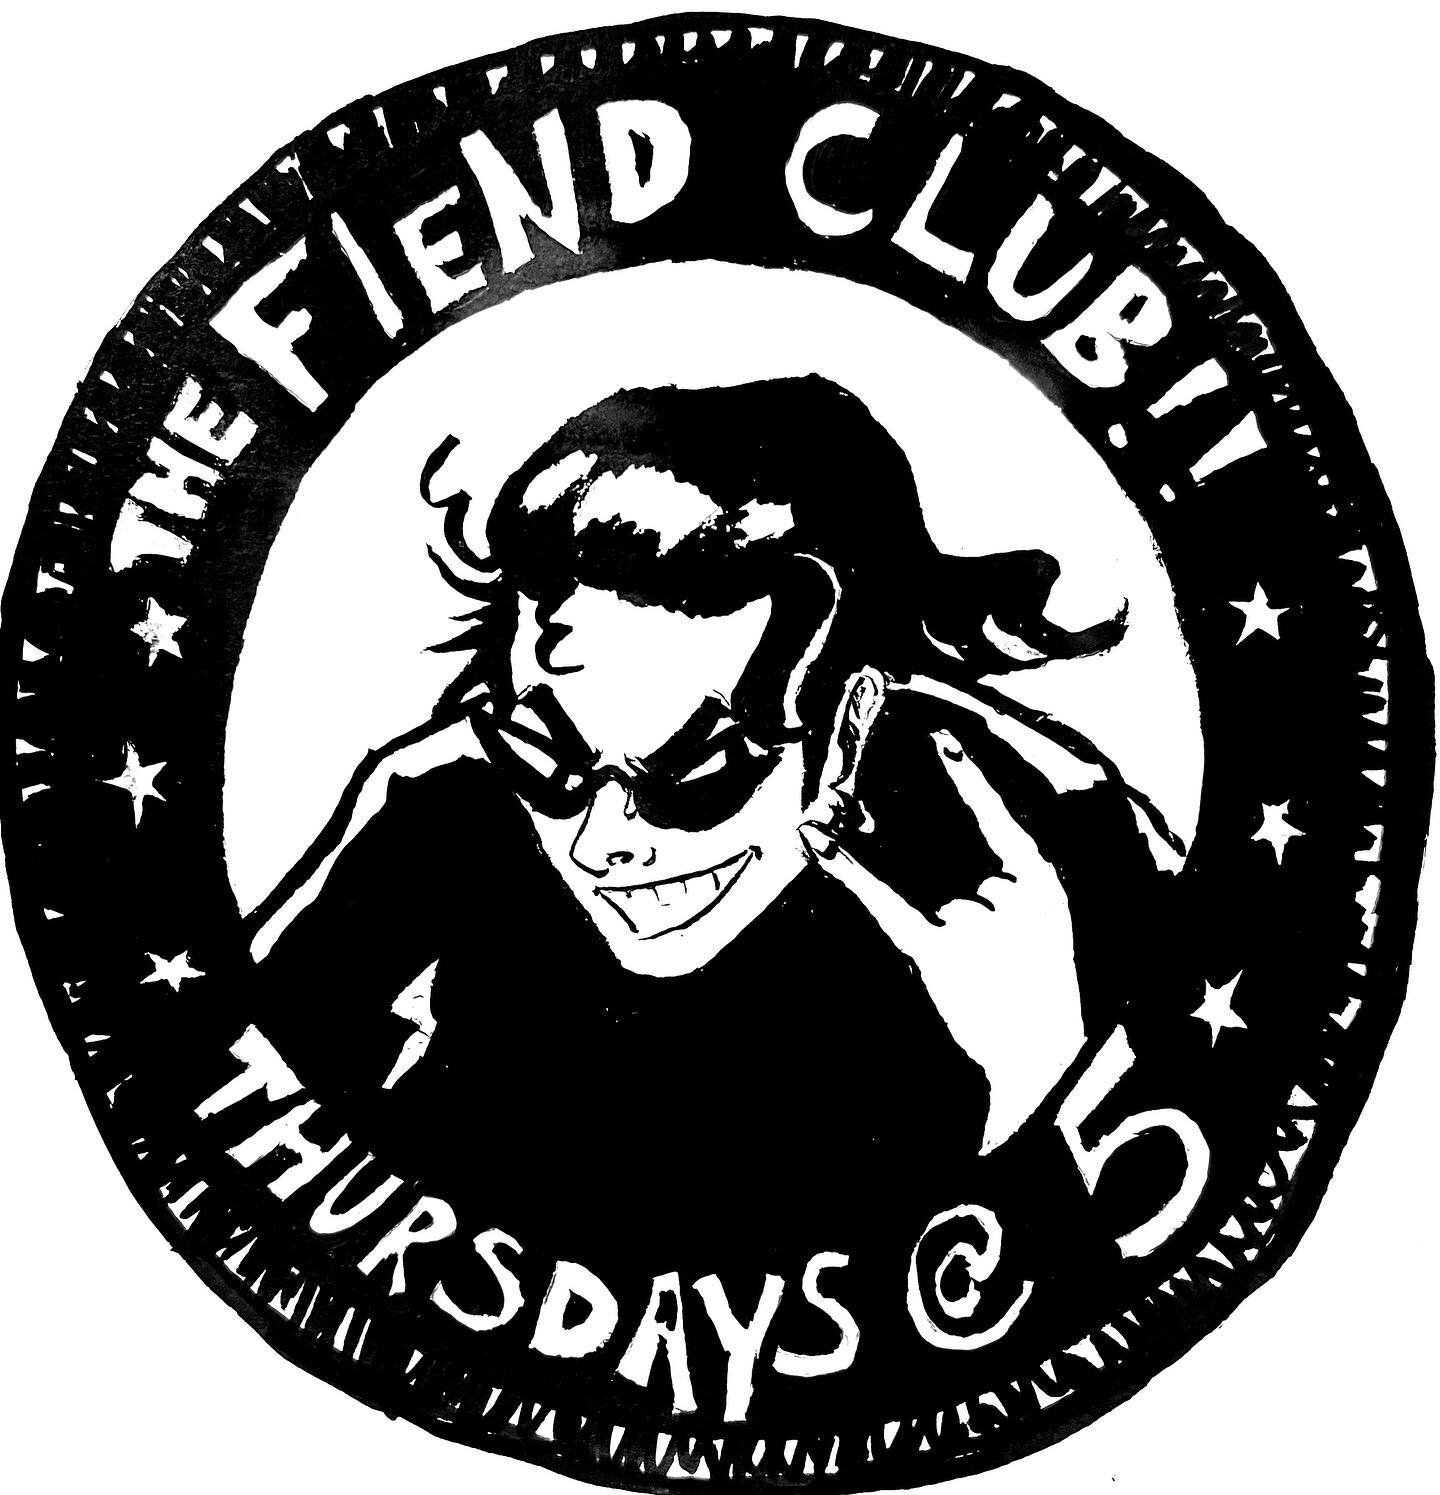 ⚡️RADIO SHOW SPOTLIGHT⚡️Tune into The Fiend Club every Thursday at 5PM to get your weekly dose of early punk and new wave headbangers🔥🤘🎸